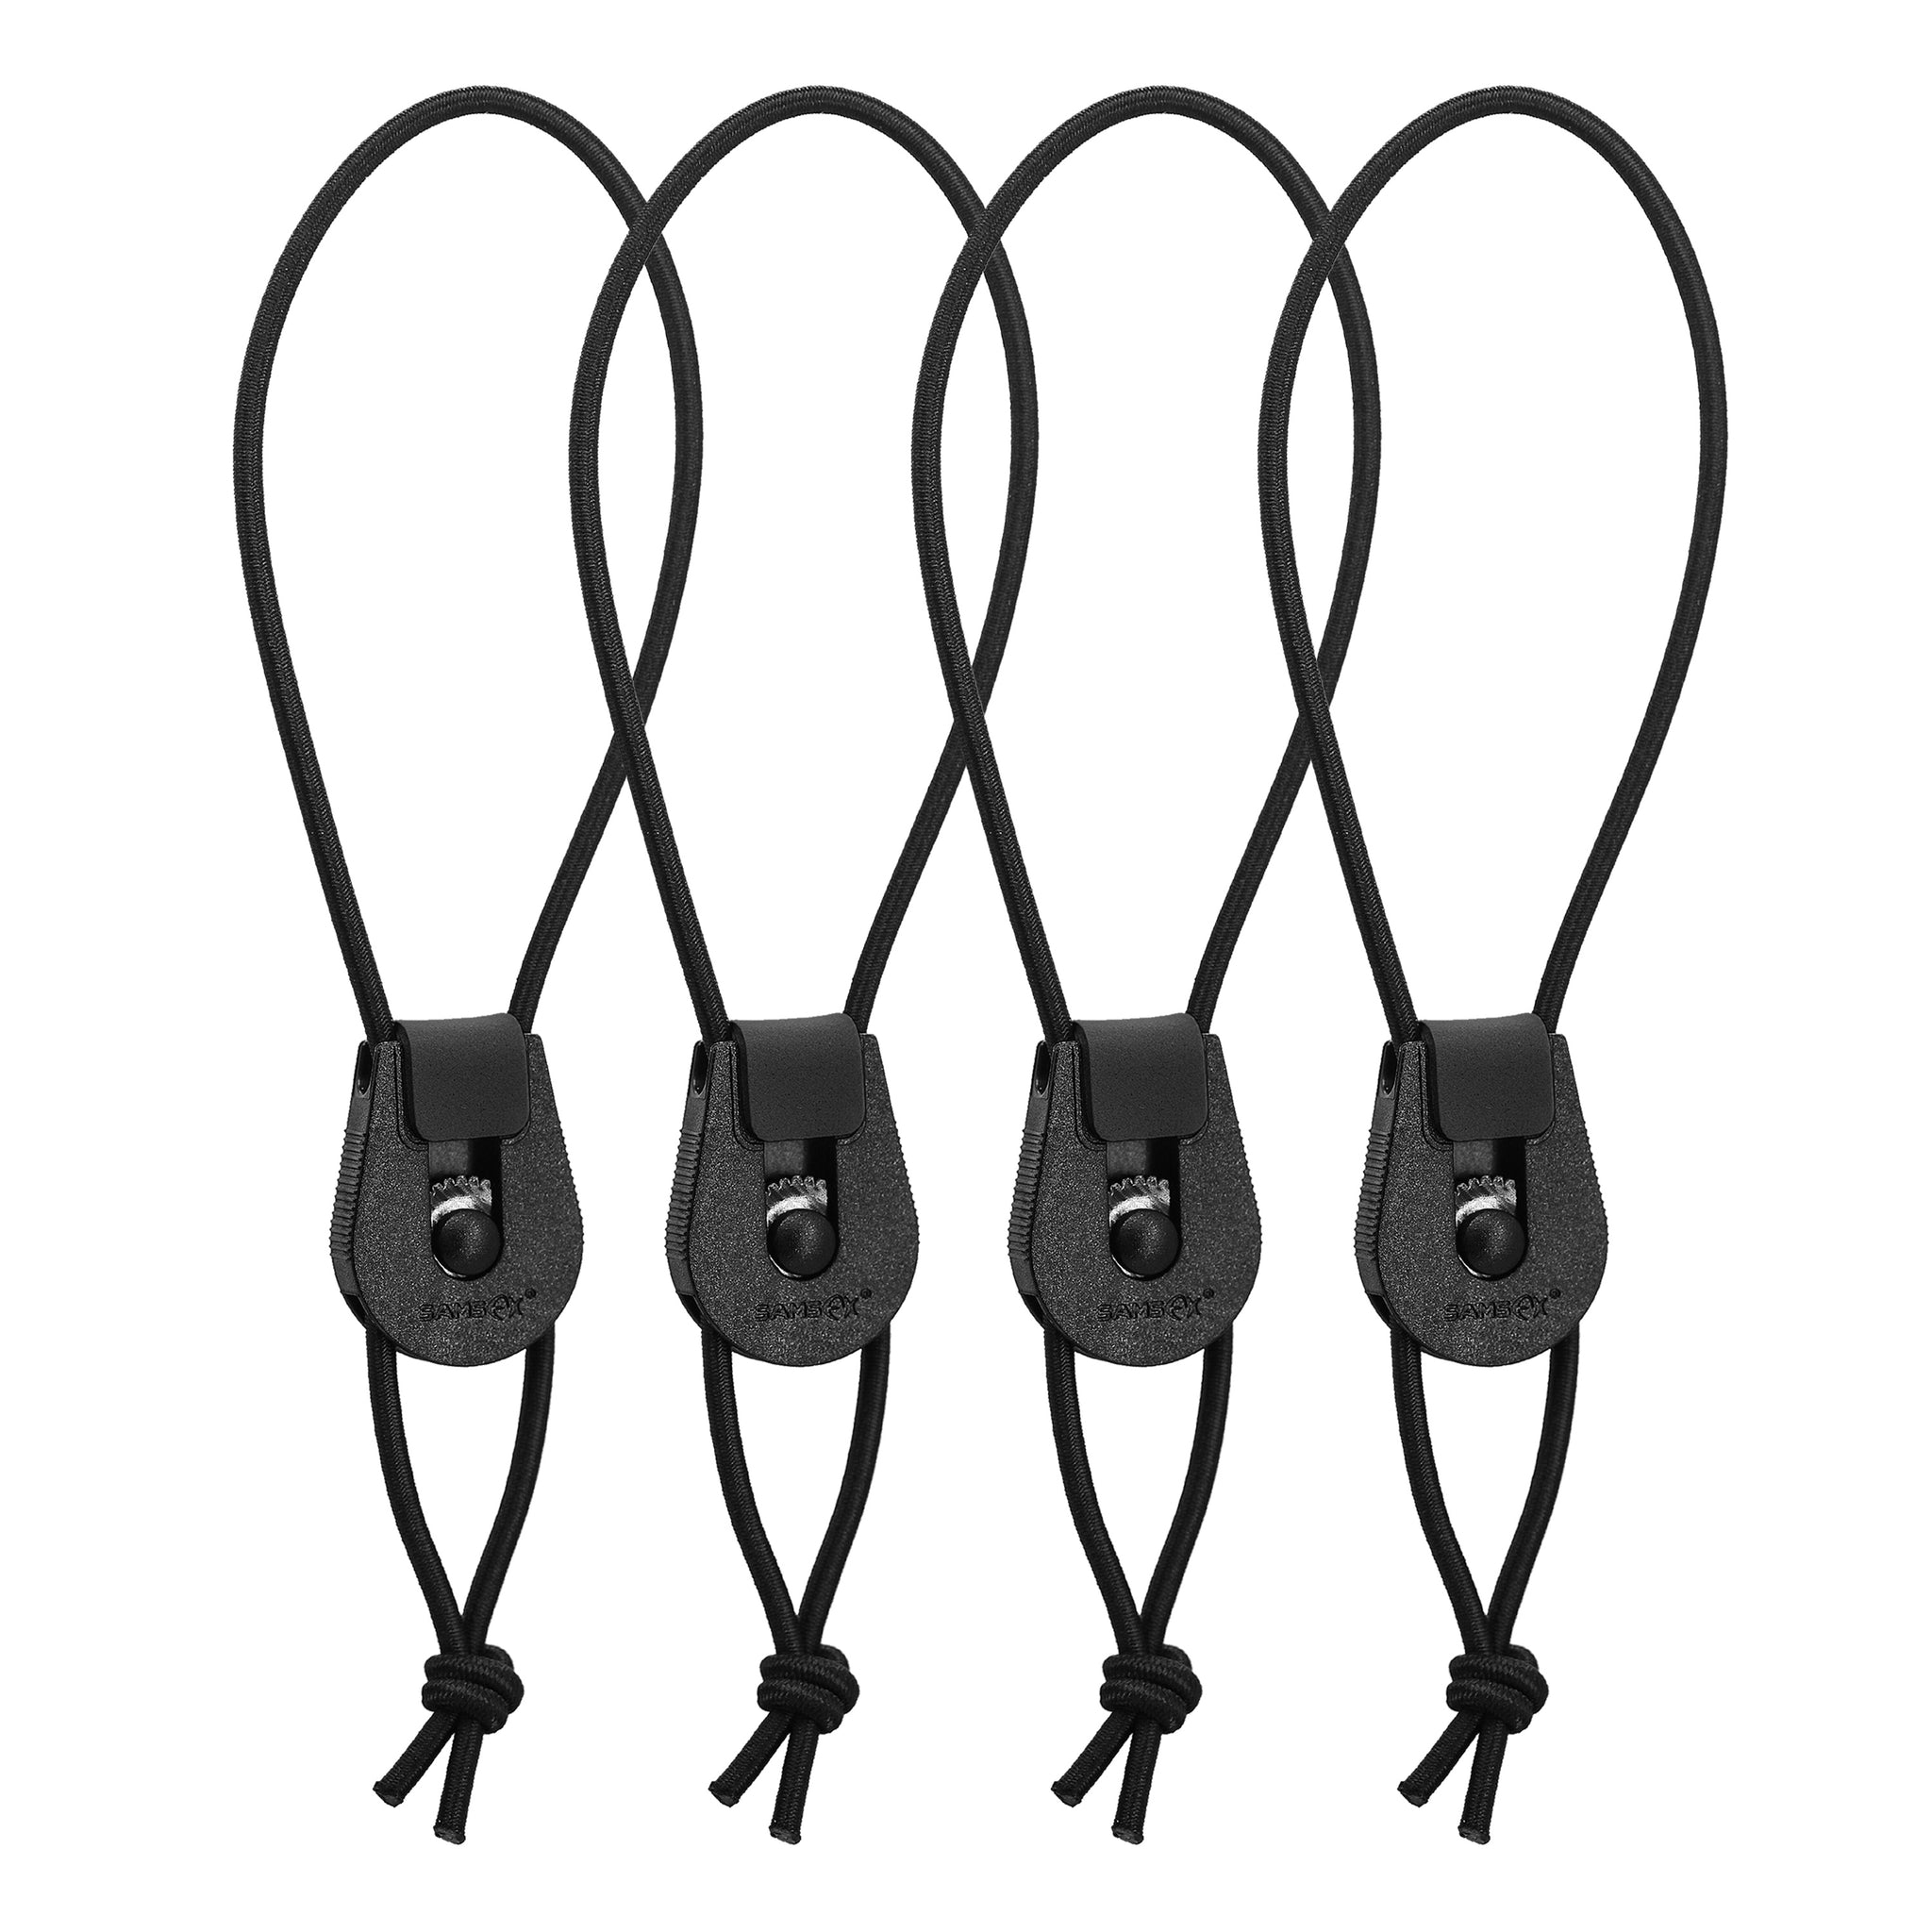 Fishing Butler - The Ultimate tie down, Bungee, Strap